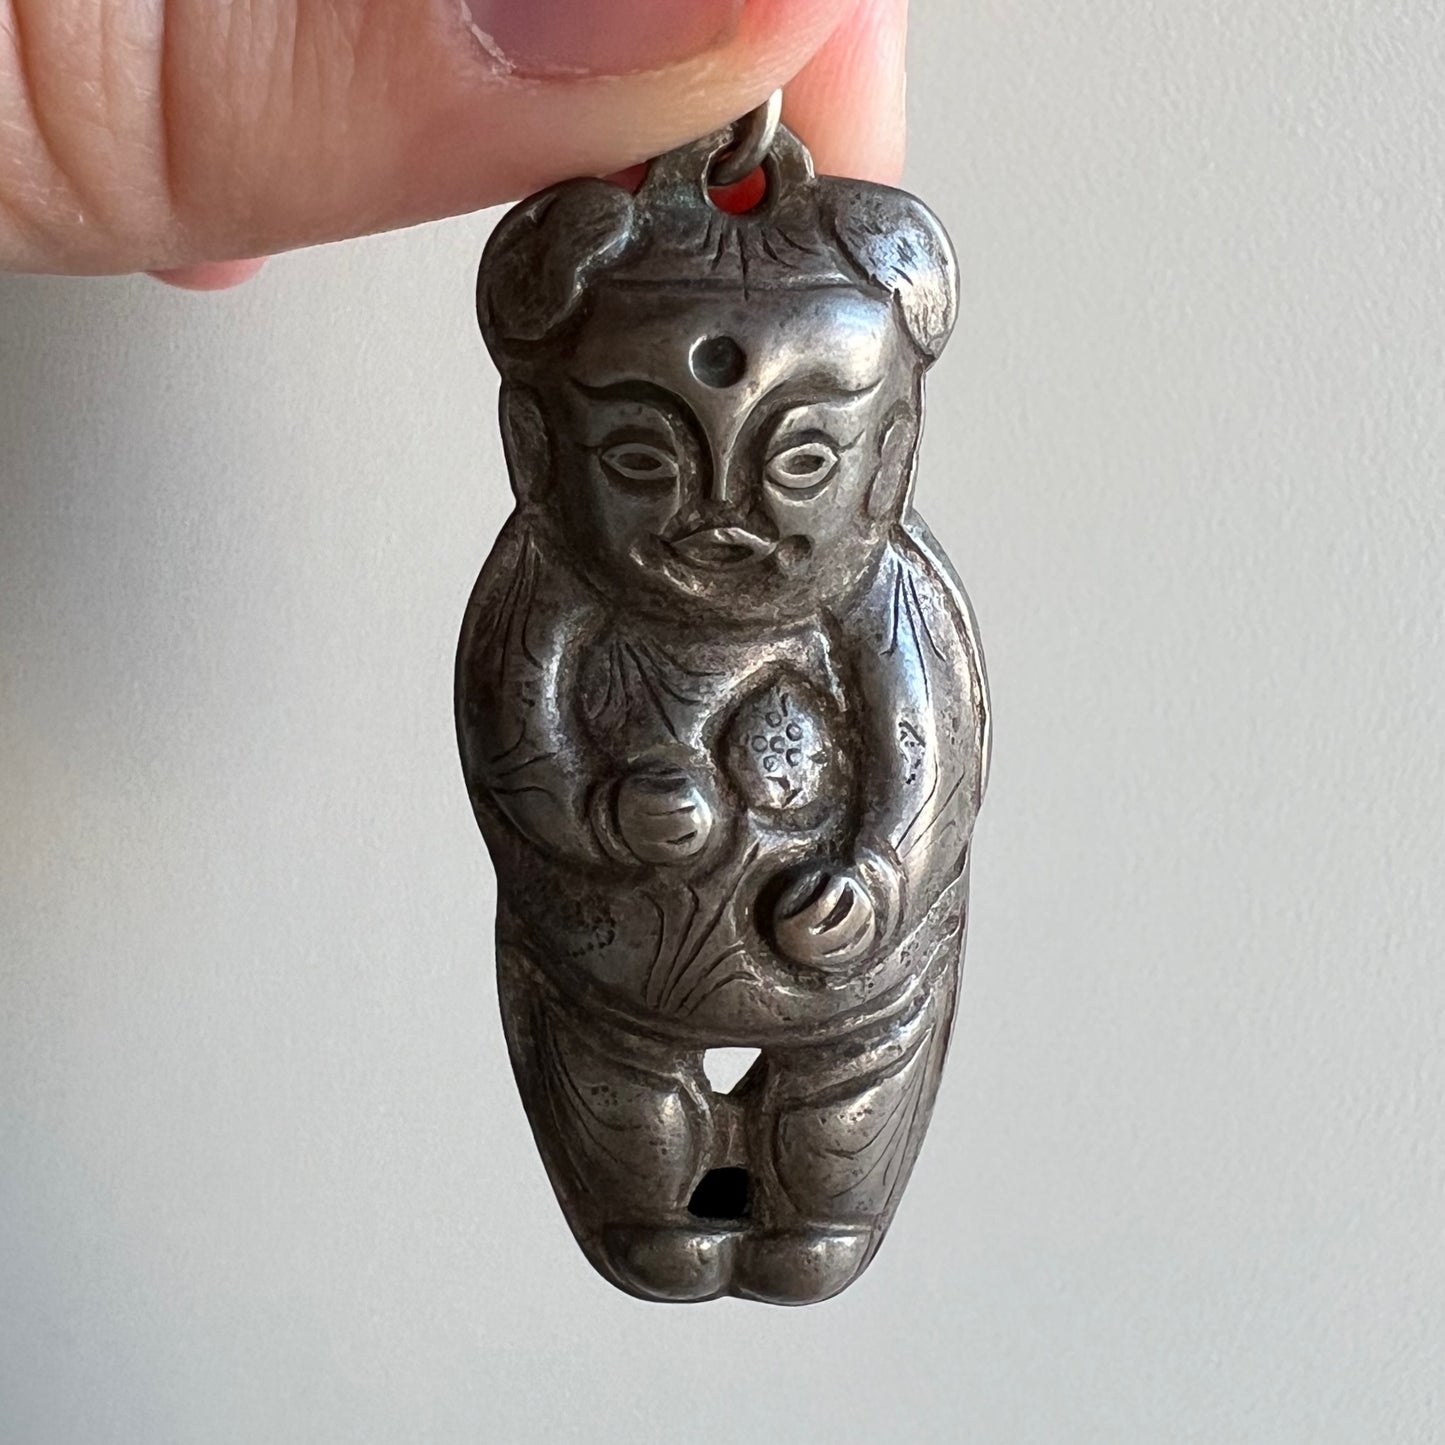 A N T I Q U E // baby luck / Qing dynasty silver femme baby amulet / a pendant